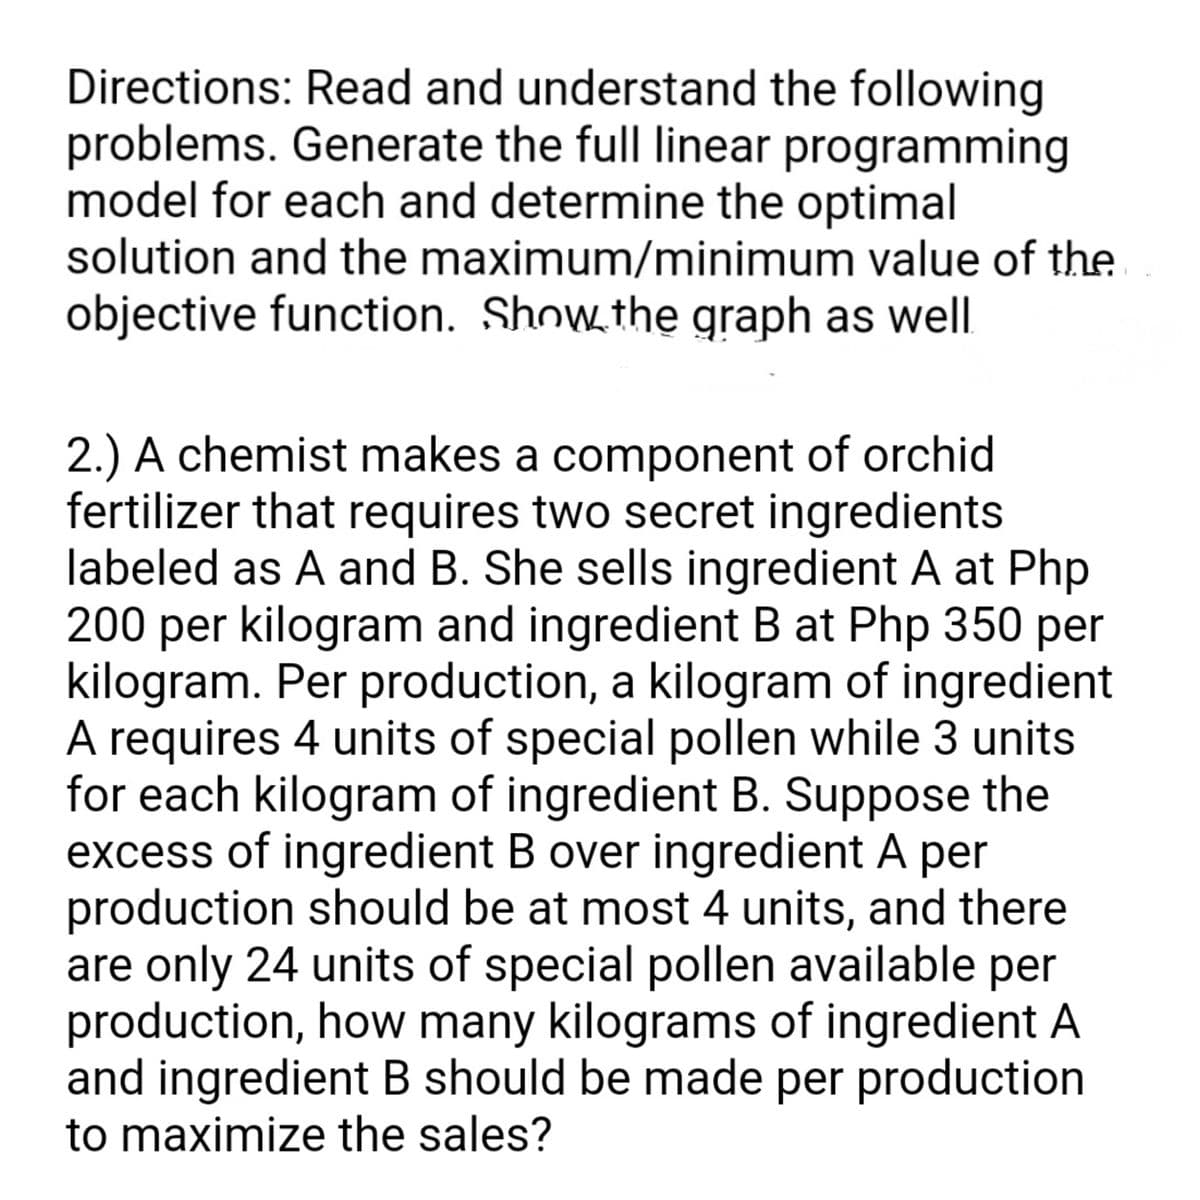 Directions: Read and understand the following
problems. Generate the full linear programming
model for each and determine the optimal
solution and the maximum/minimum value of the
objective function. Show the graph as well
2.) A chemist makes a component of orchid
fertilizer that requires two secret ingredients
labeled as A and B. She sells ingredient A at Php
200 per kilogram and ingredient B at Php 350 per
kilogram. Per production, a kilogram of ingredient
A requires 4 units of special pollen while 3 units
for each kilogram of ingredient B. Suppose the
excess of ingredient B over ingredient A per
production should be at most 4 units, and there
are only 24 units of special pollen available per
production, how many kilograms of ingredient A
and ingredient B should be made per production
to maximize the sales?
